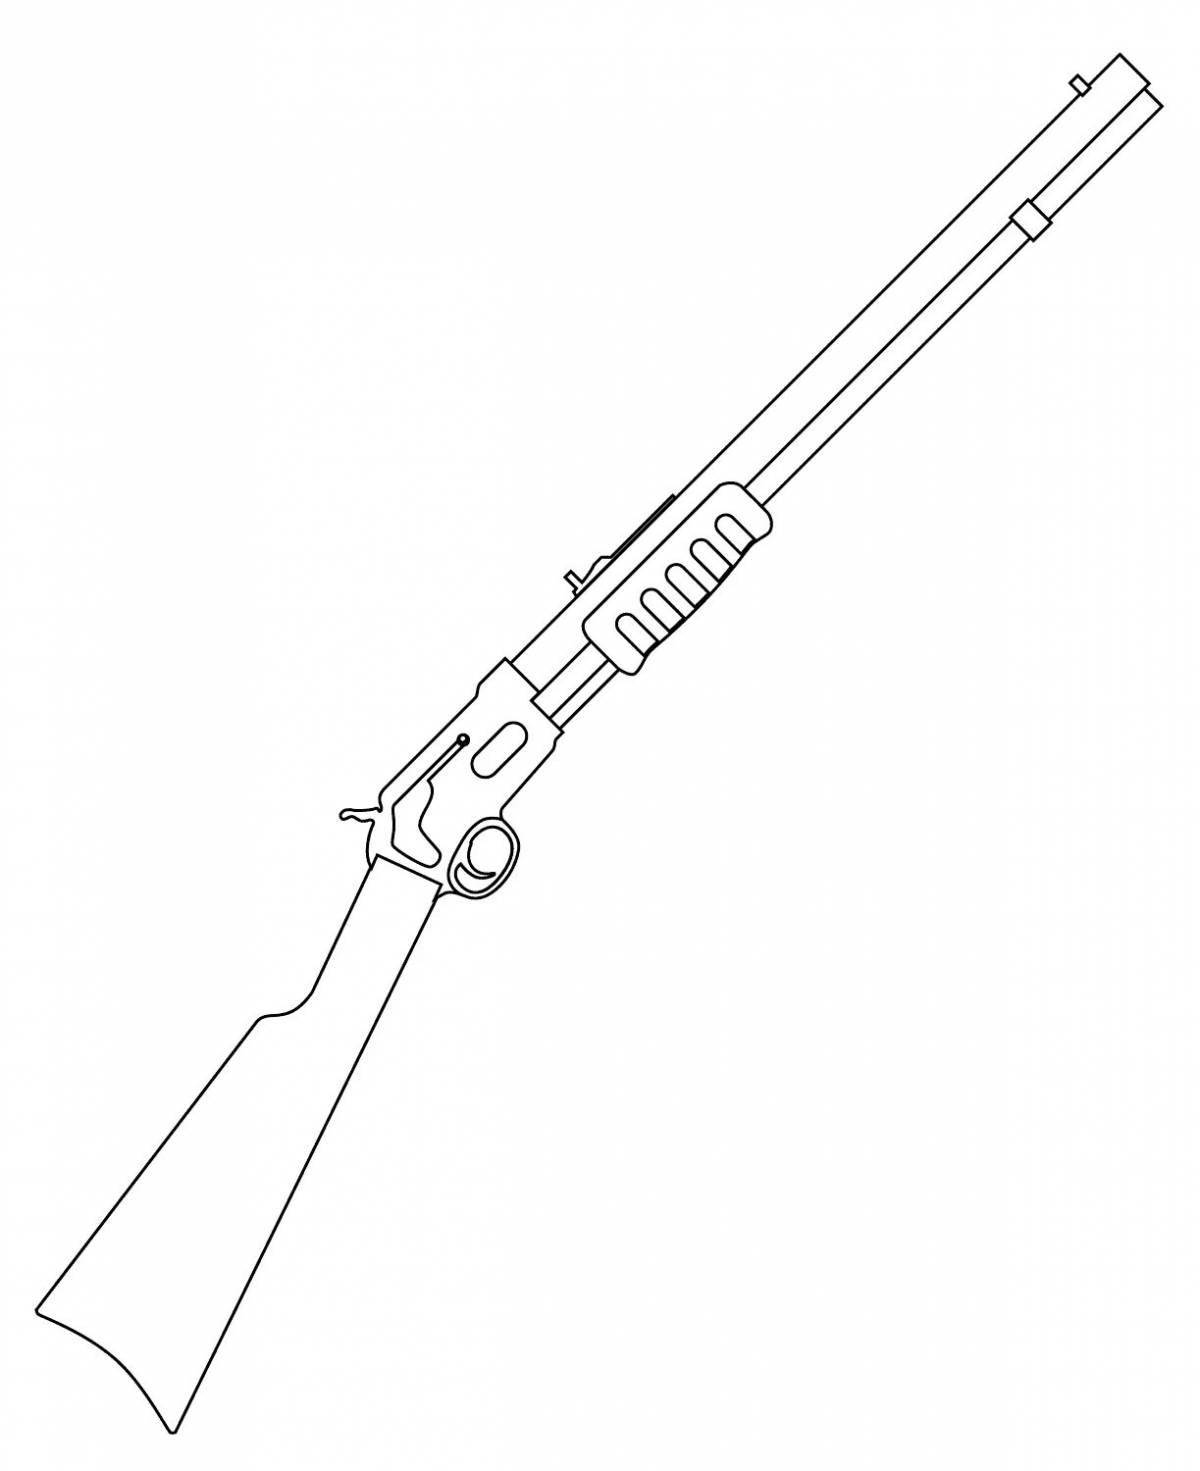 Exquisite weapons coloring page